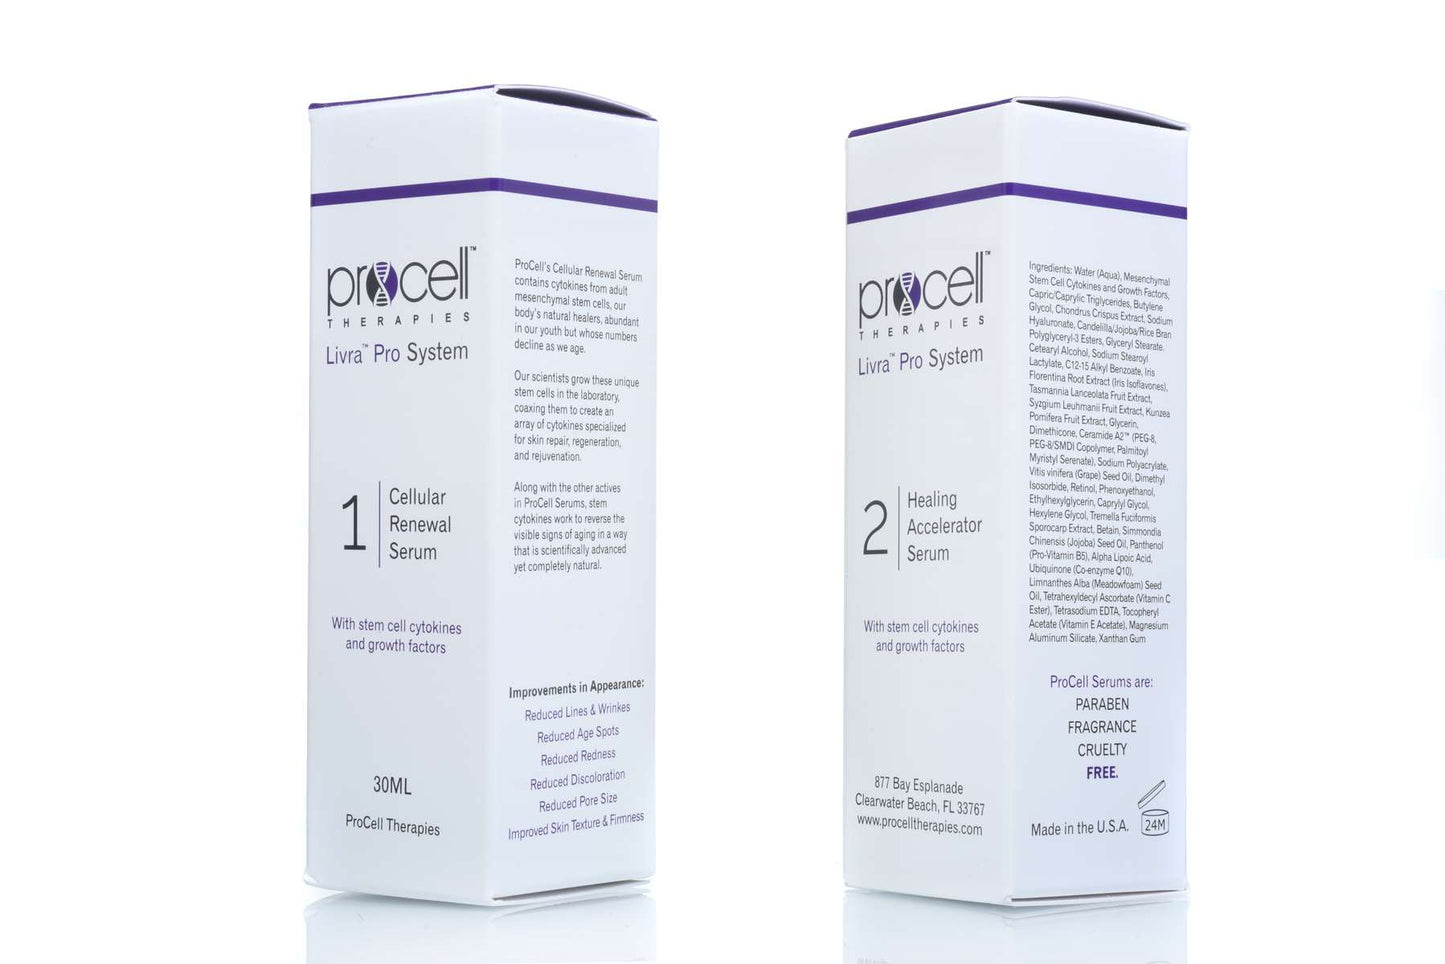 Procell Therapies PRO Facial Serum for Post Microneedling Treatment